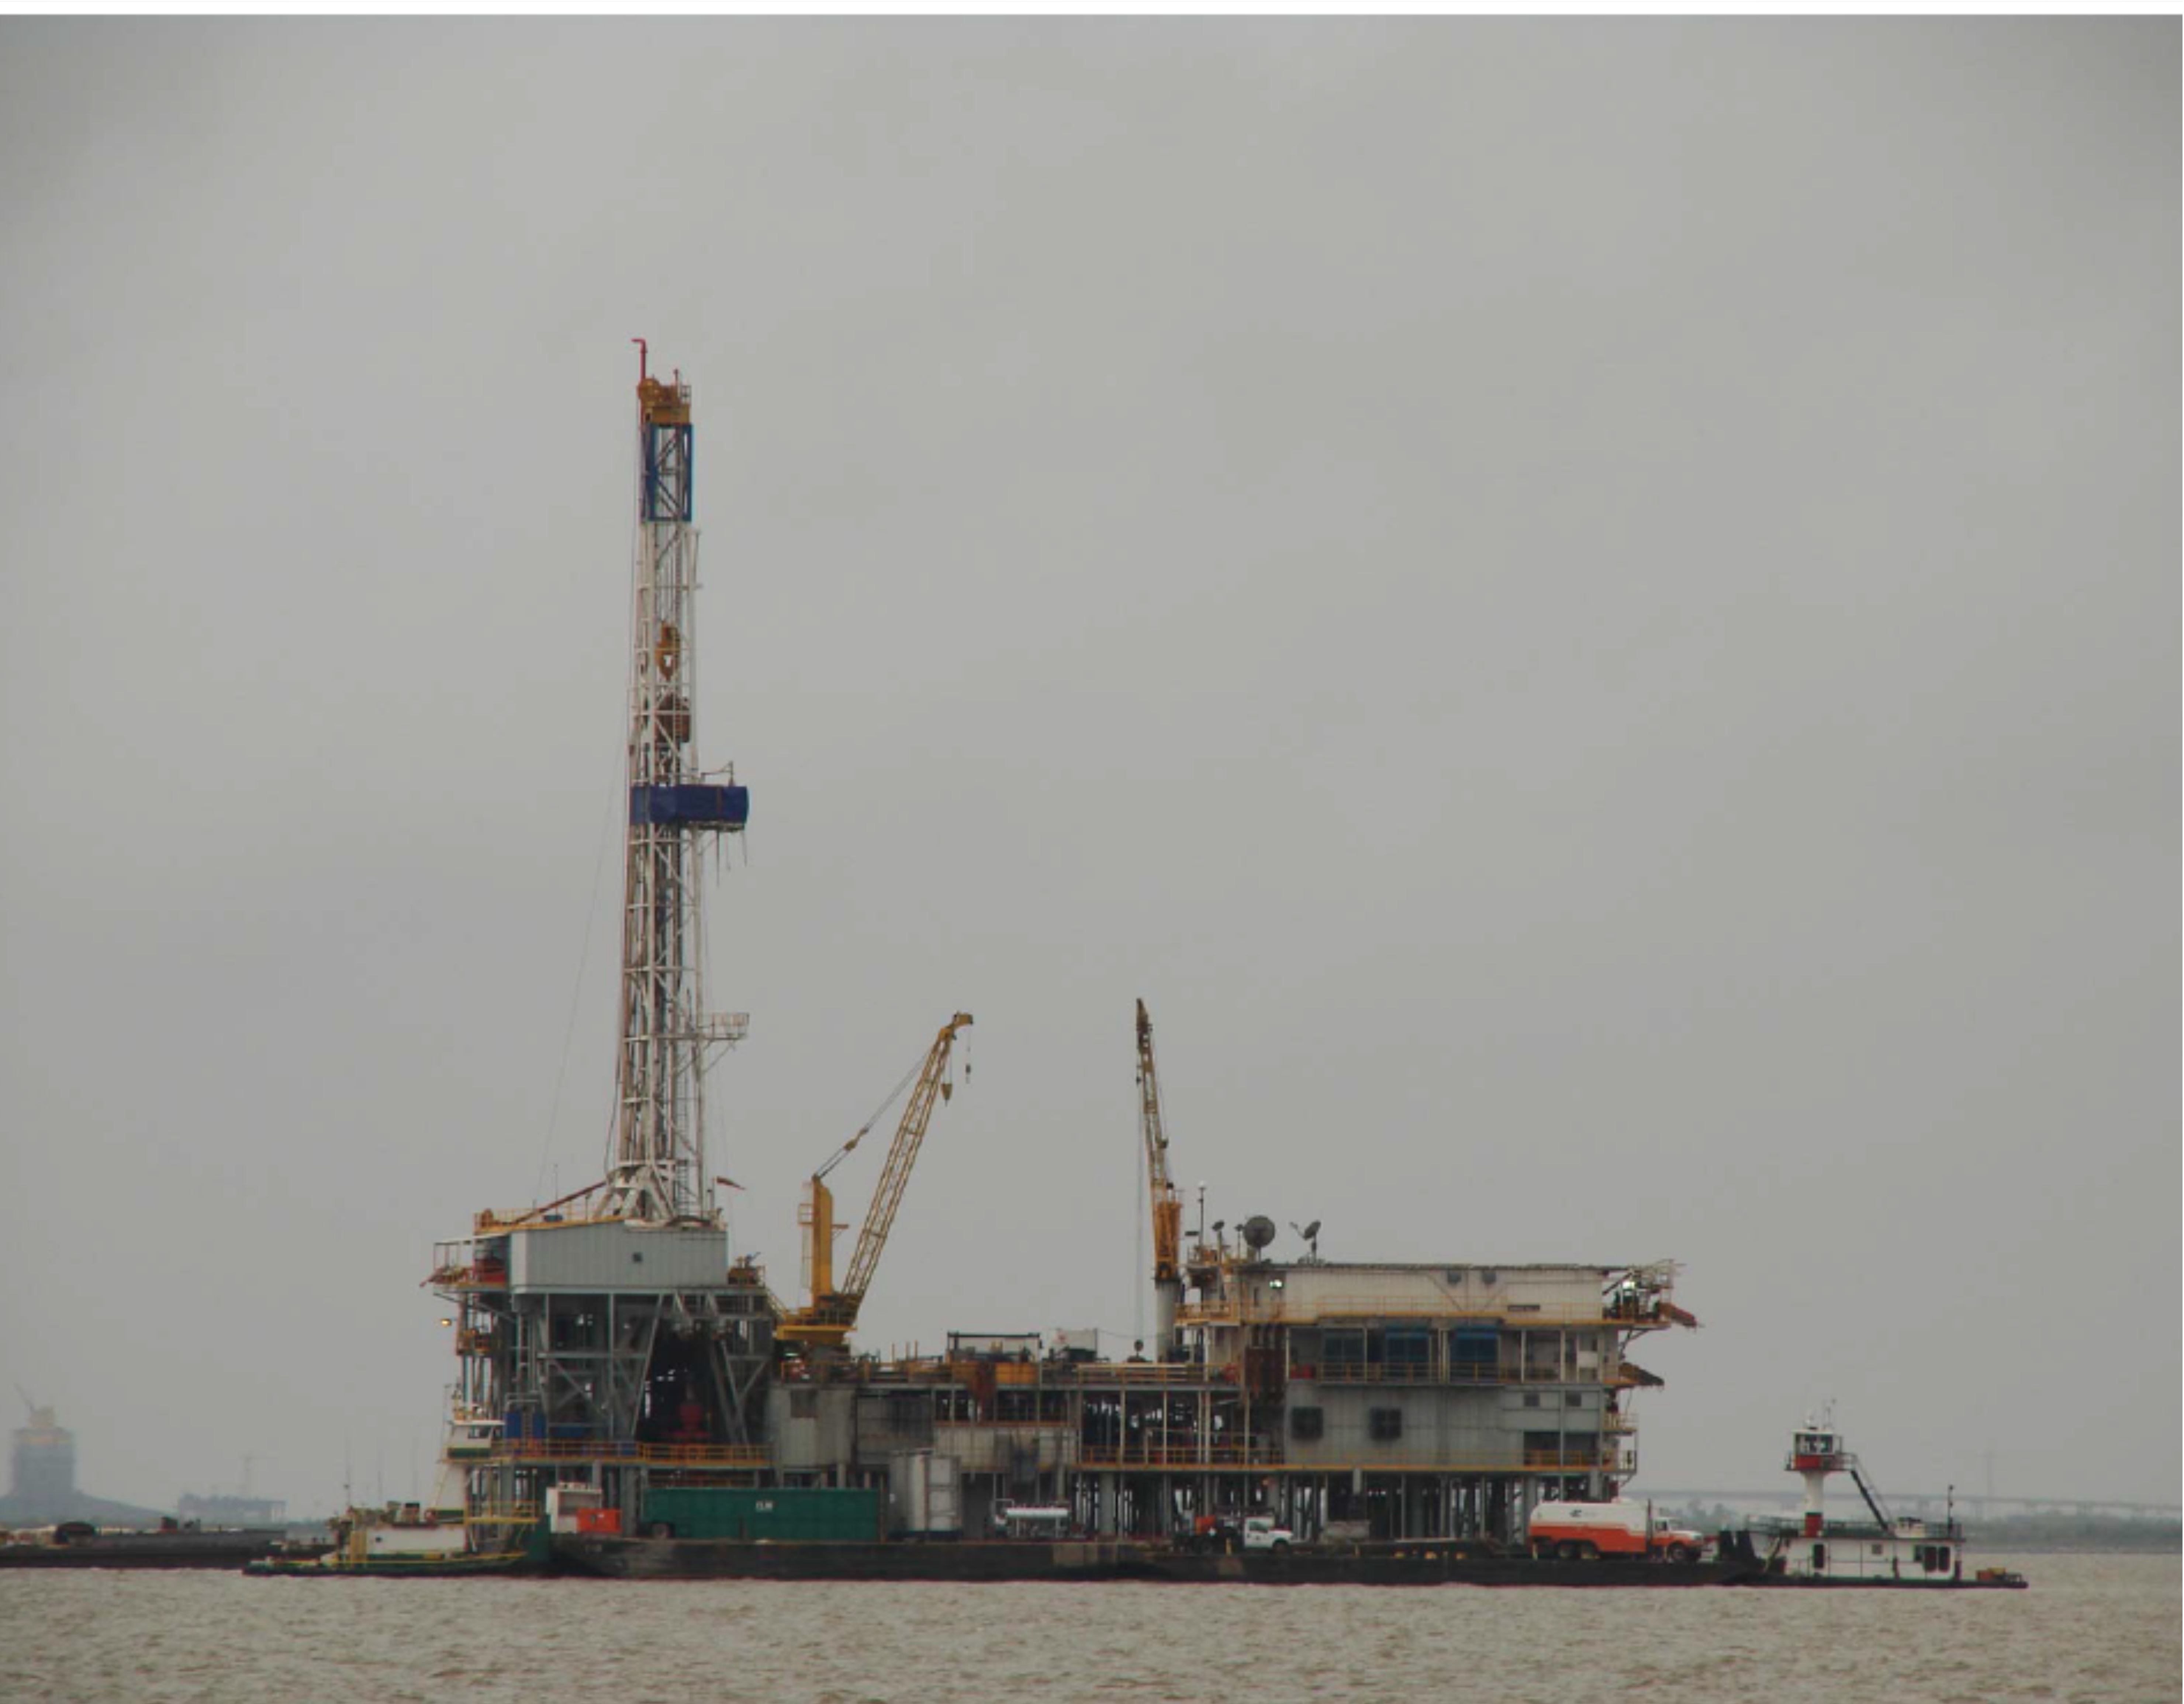 CEG Holdings, LLC. - Offshore Drilling Project in Galveston Bay, Texas - Day View